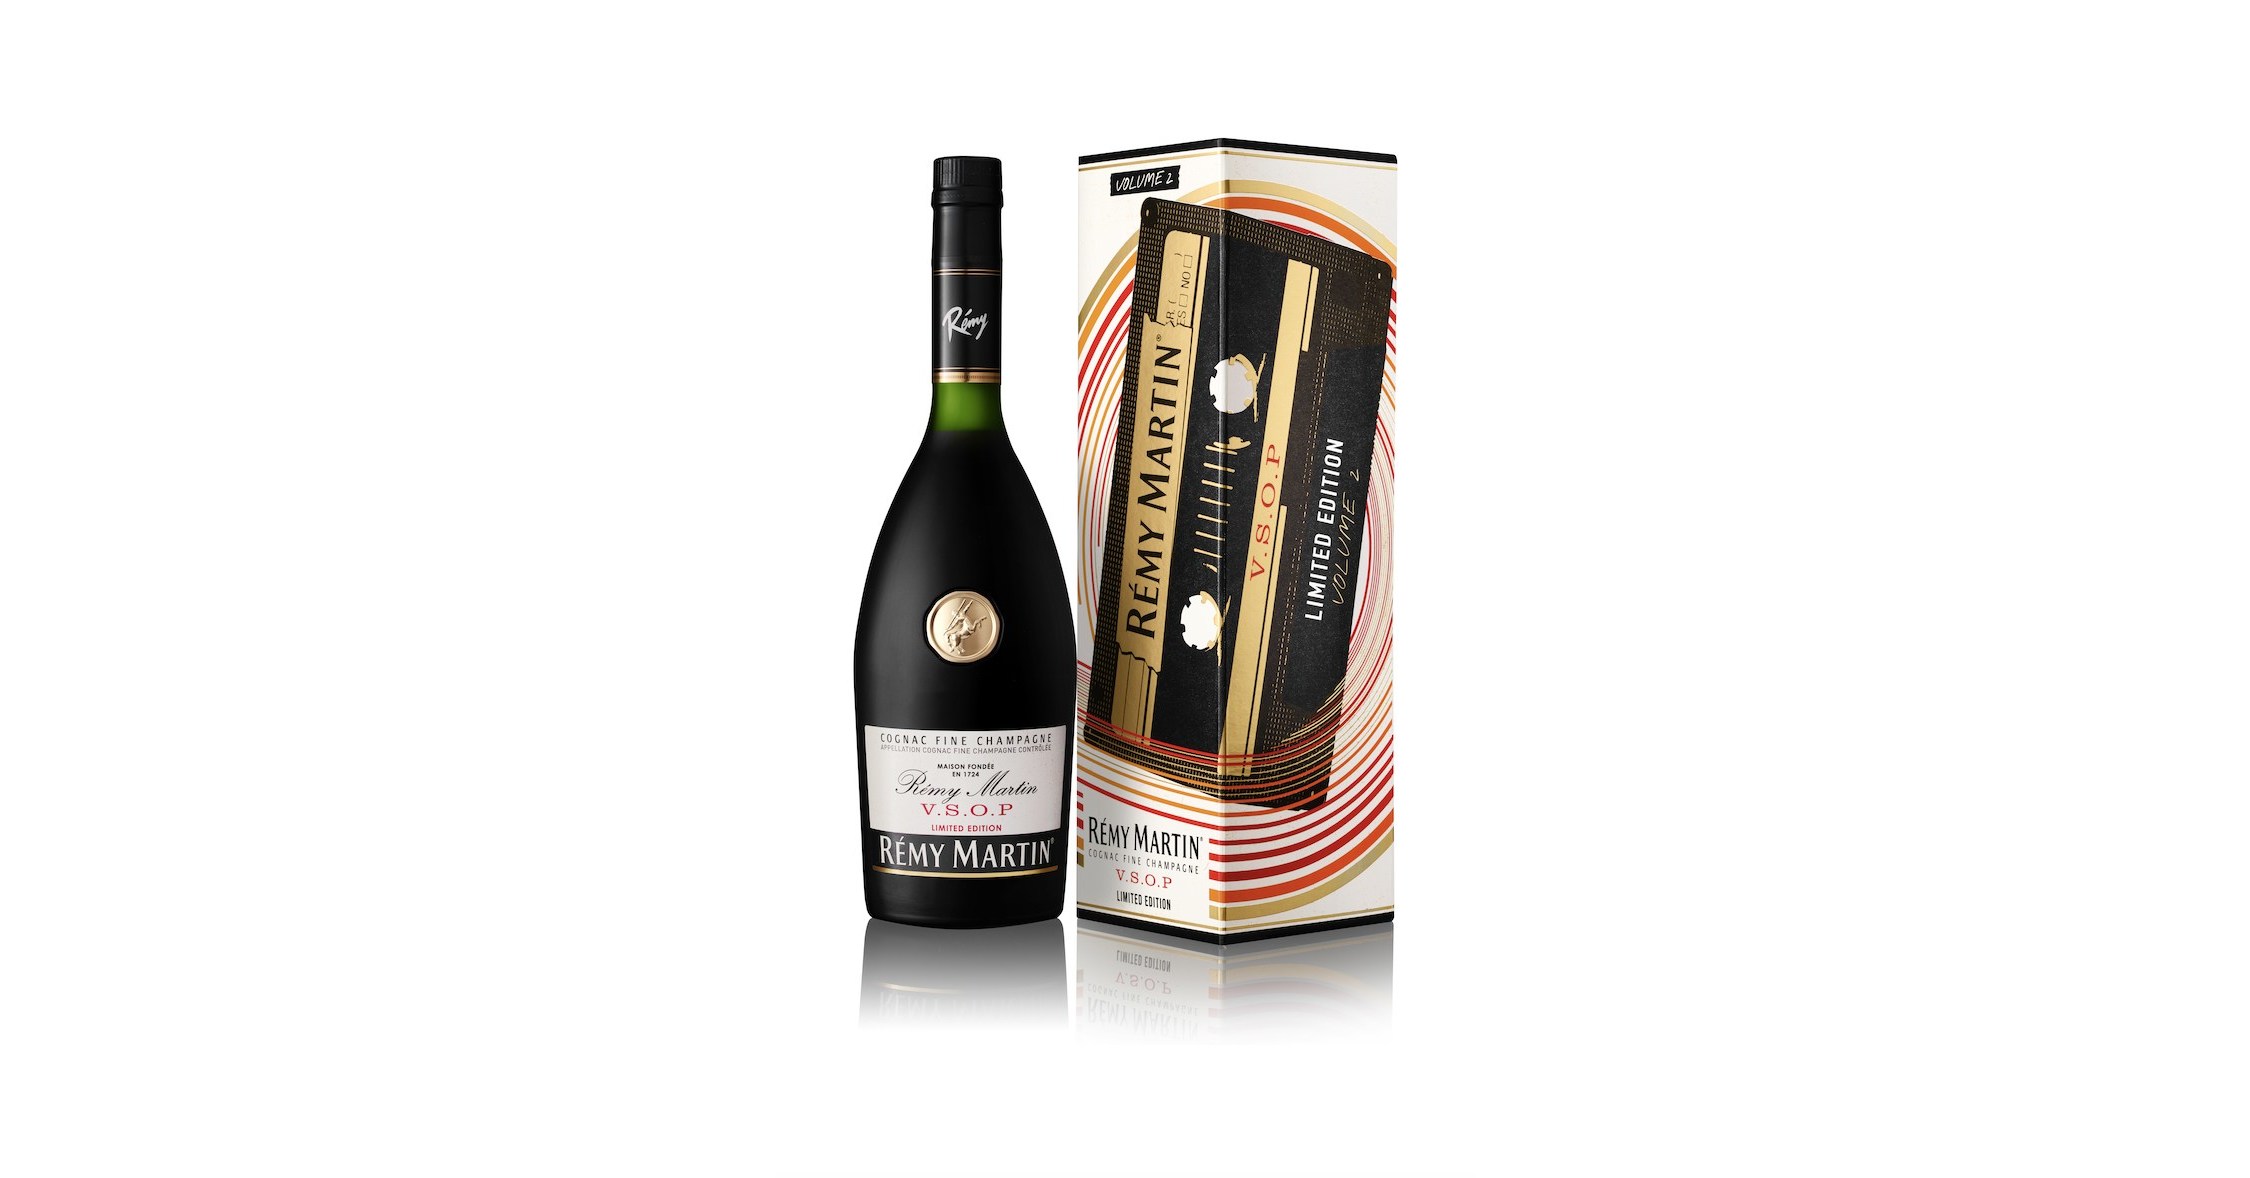 Moët Hennessy expands digital creative remit with Trad3mark Group